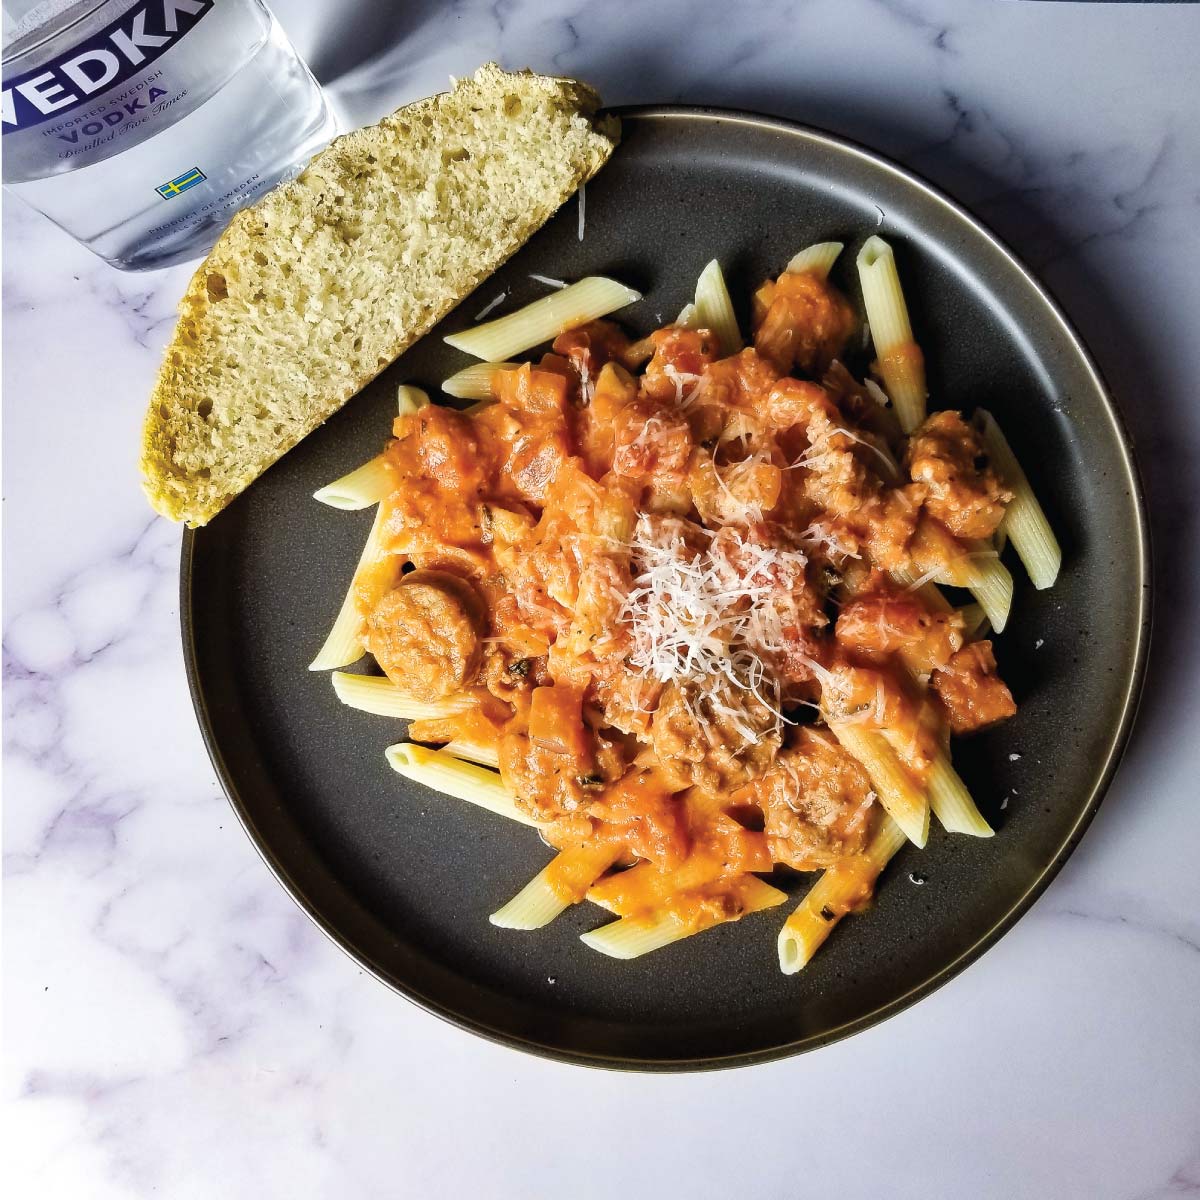 Penne pasta on a plate topped with vodka sauce and a slice of Italian bread on the side.